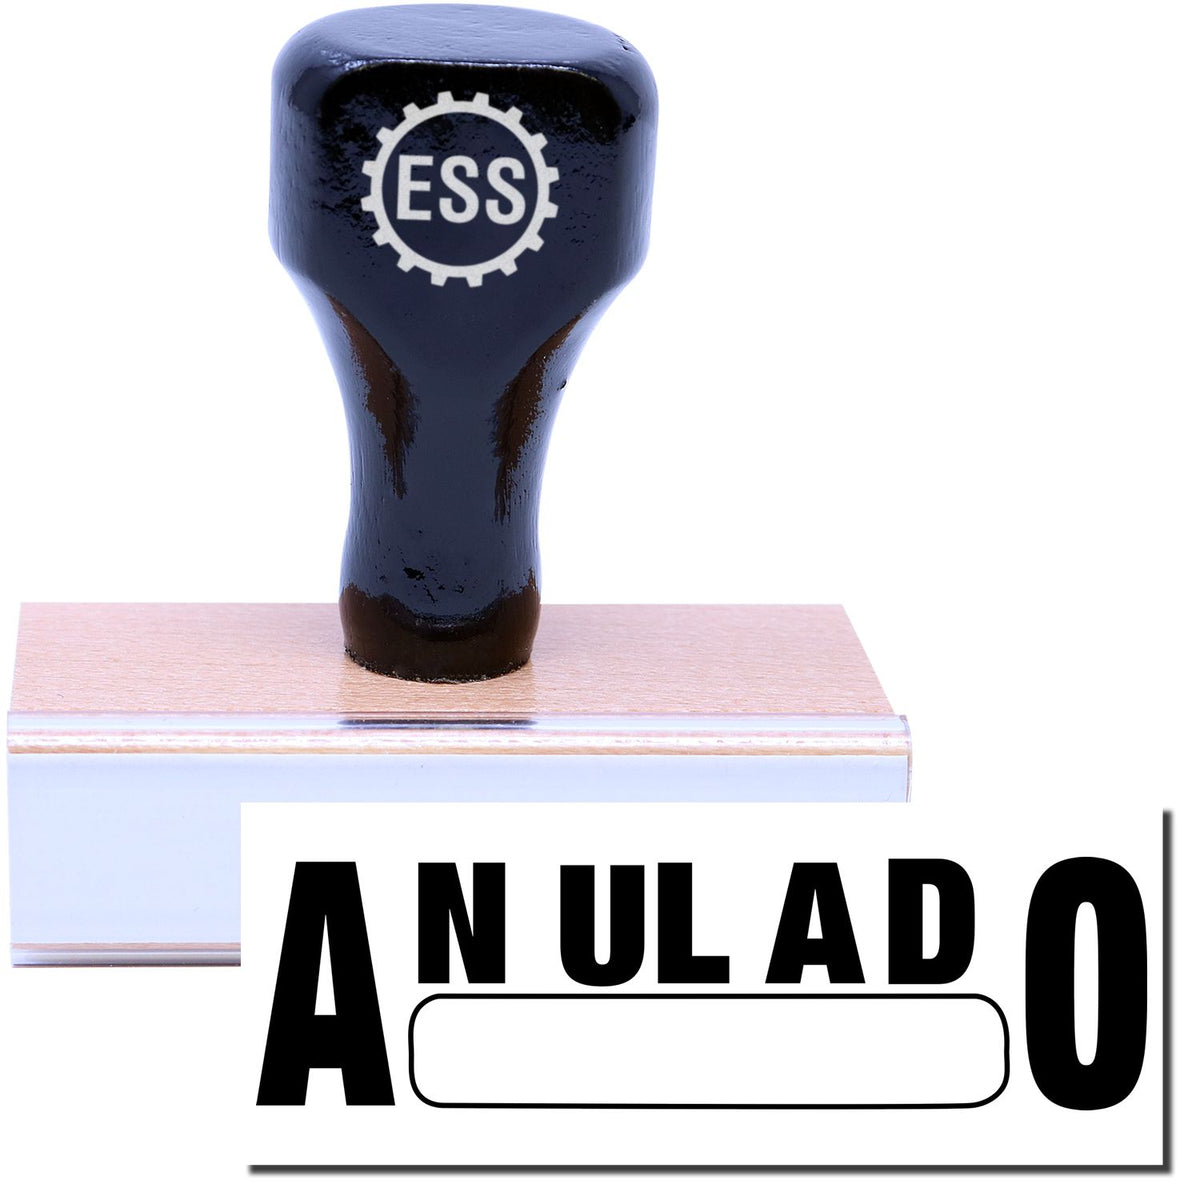 A stock office rubber stamp with a stamped image showing how the text &quot;ANULADO&quot; with a box is displayed after stamping.